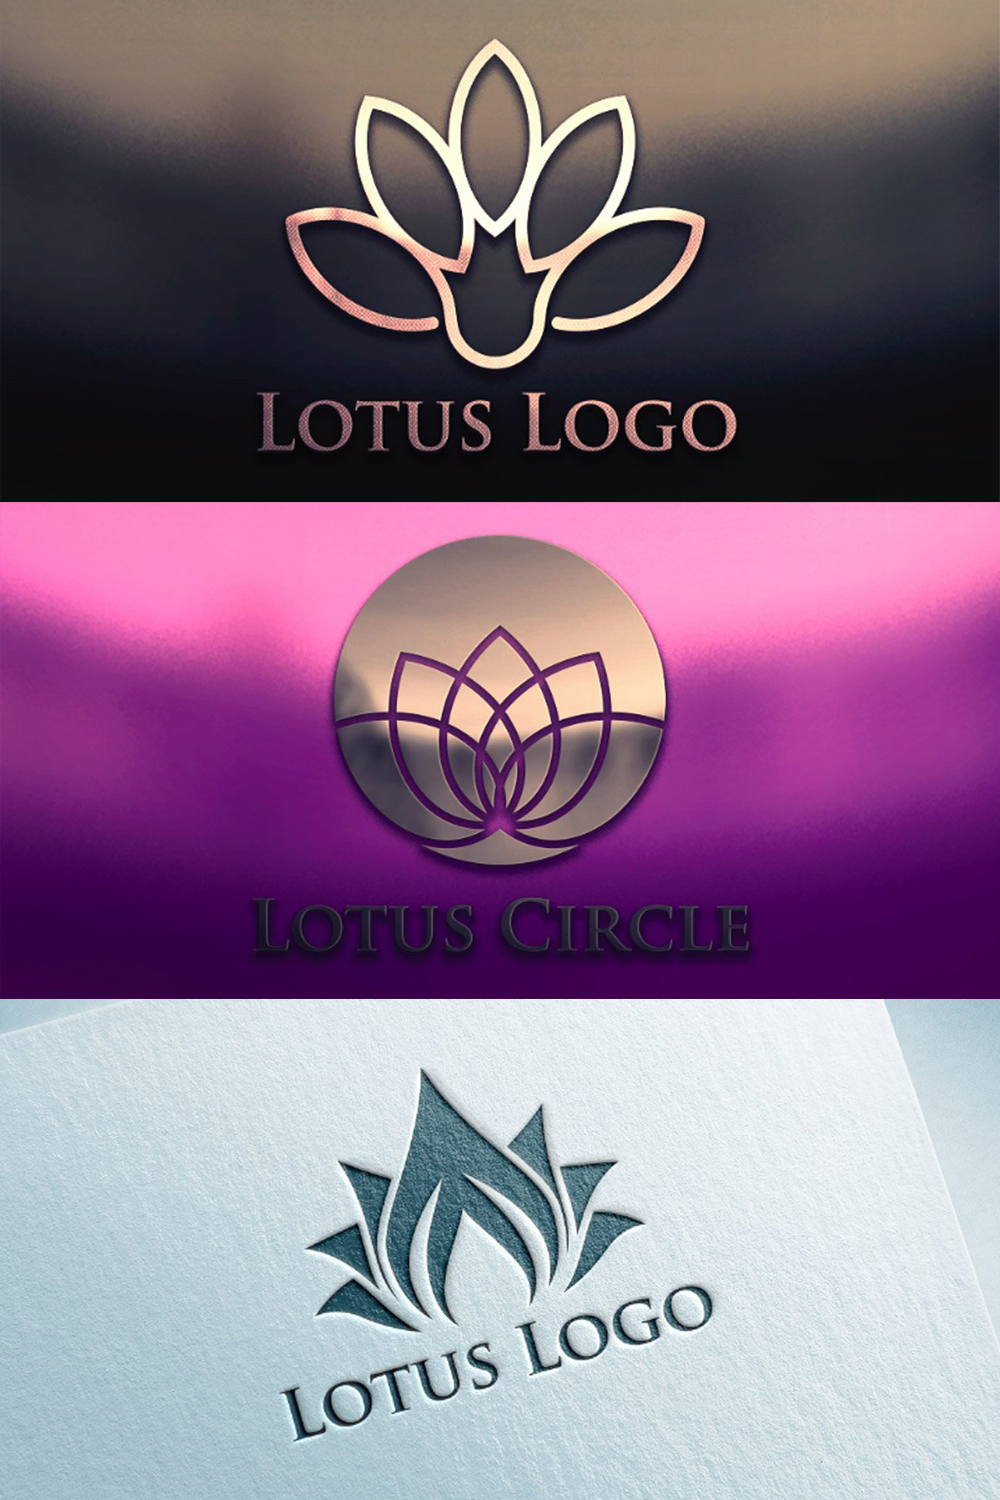 More striking are two golden lotus flower logos on different colored backgrounds and one pale blue logo.